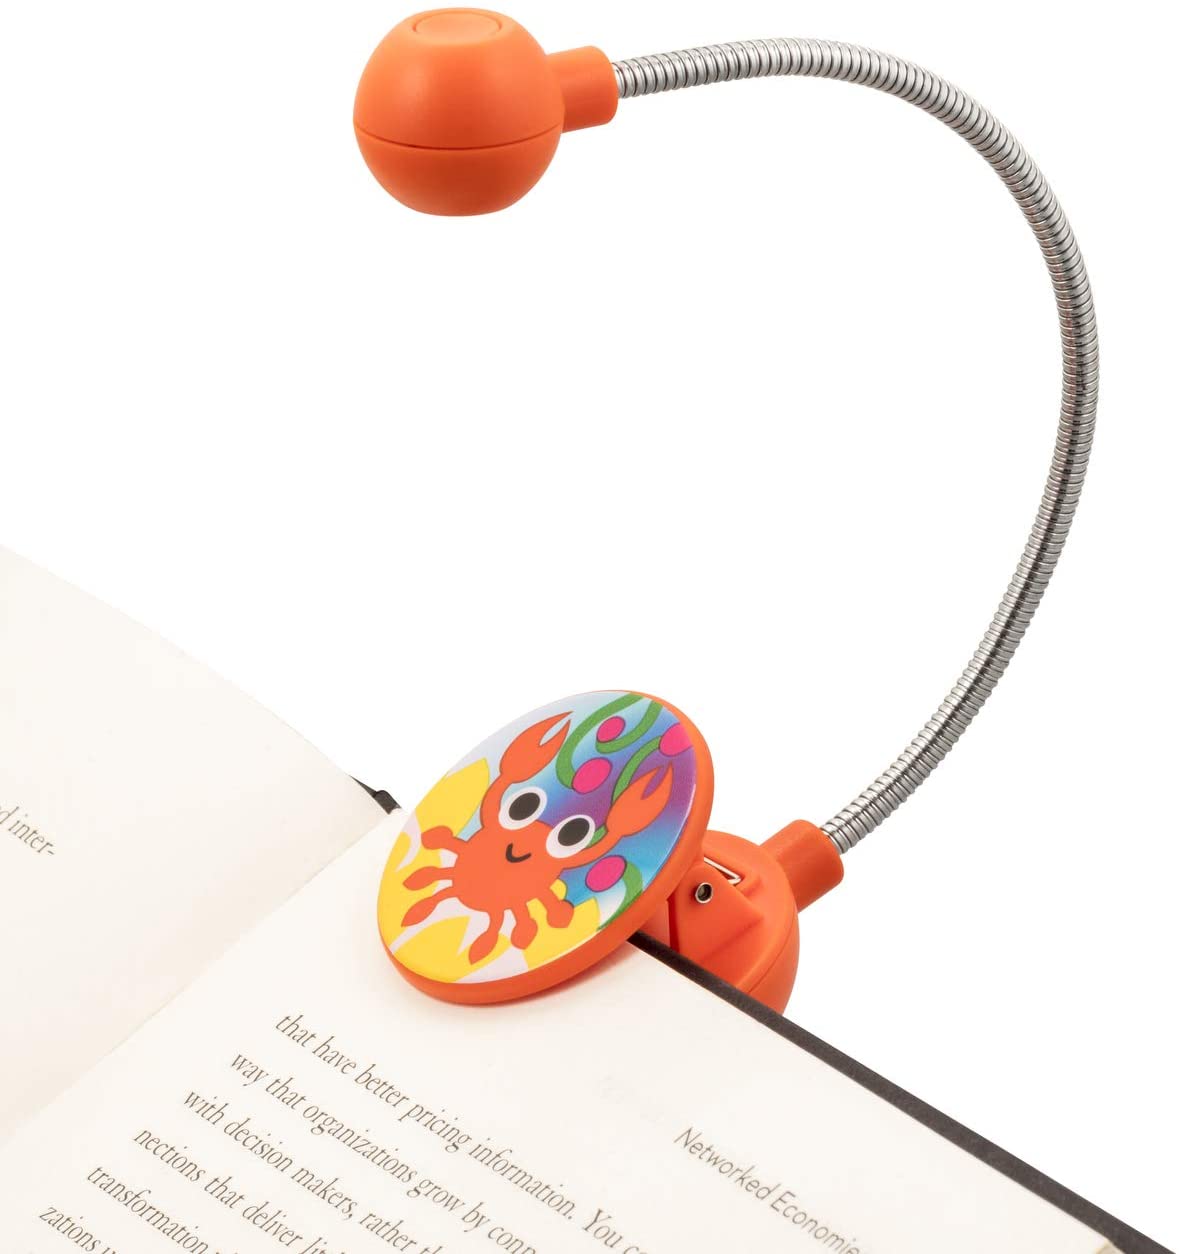 WITHit French Bull Clip On Book Light, Orange Crab